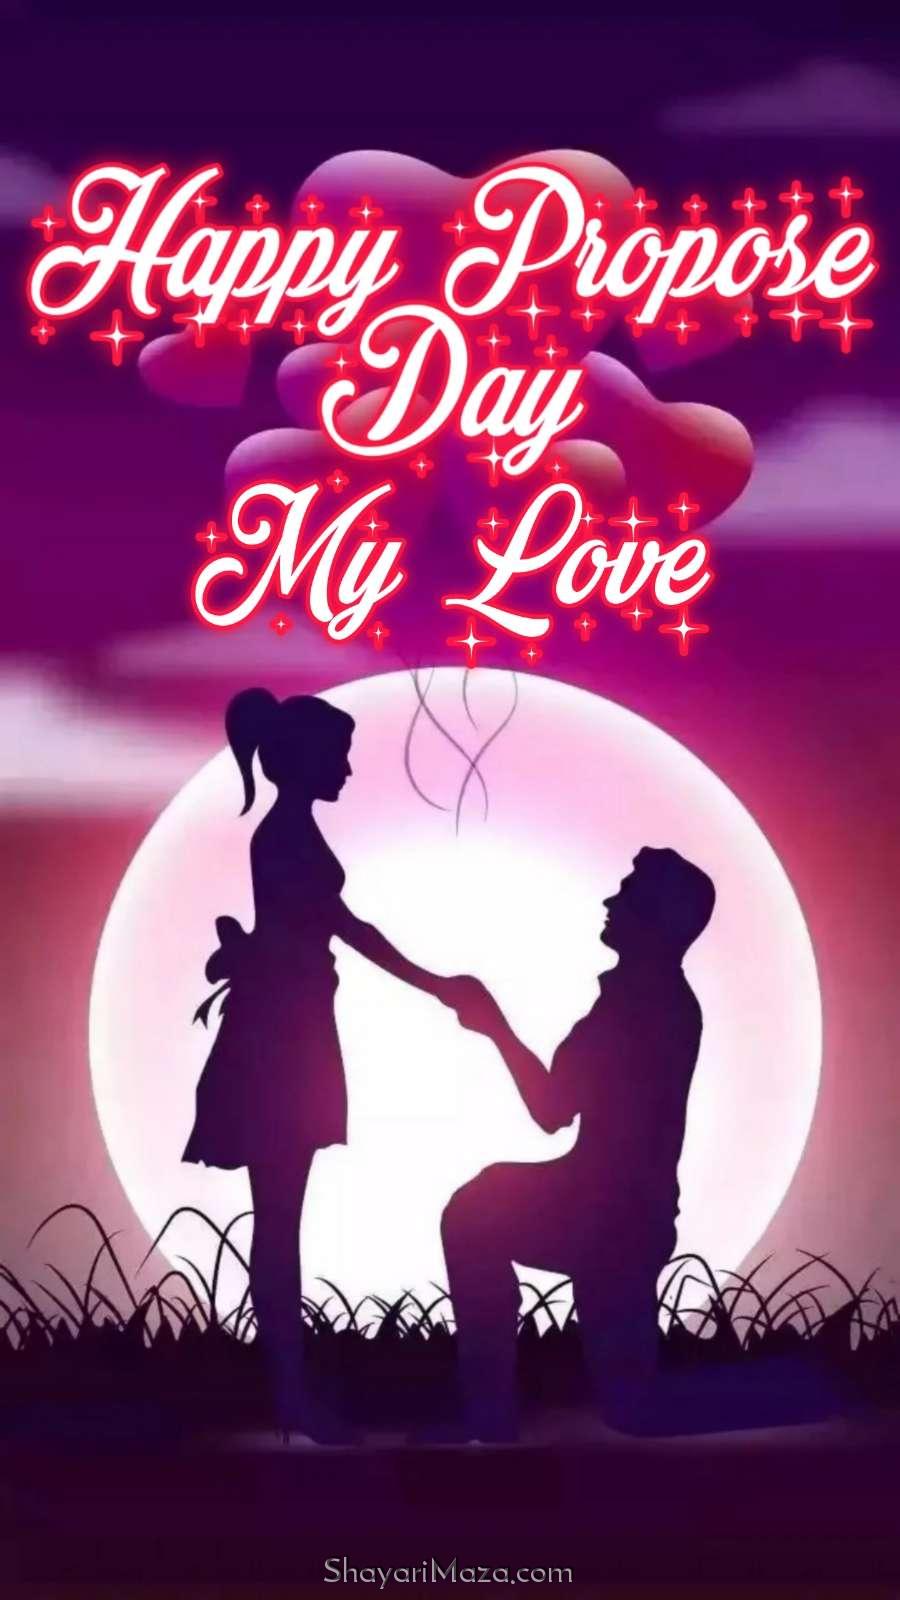 Happy Propose Day My Love Images Download